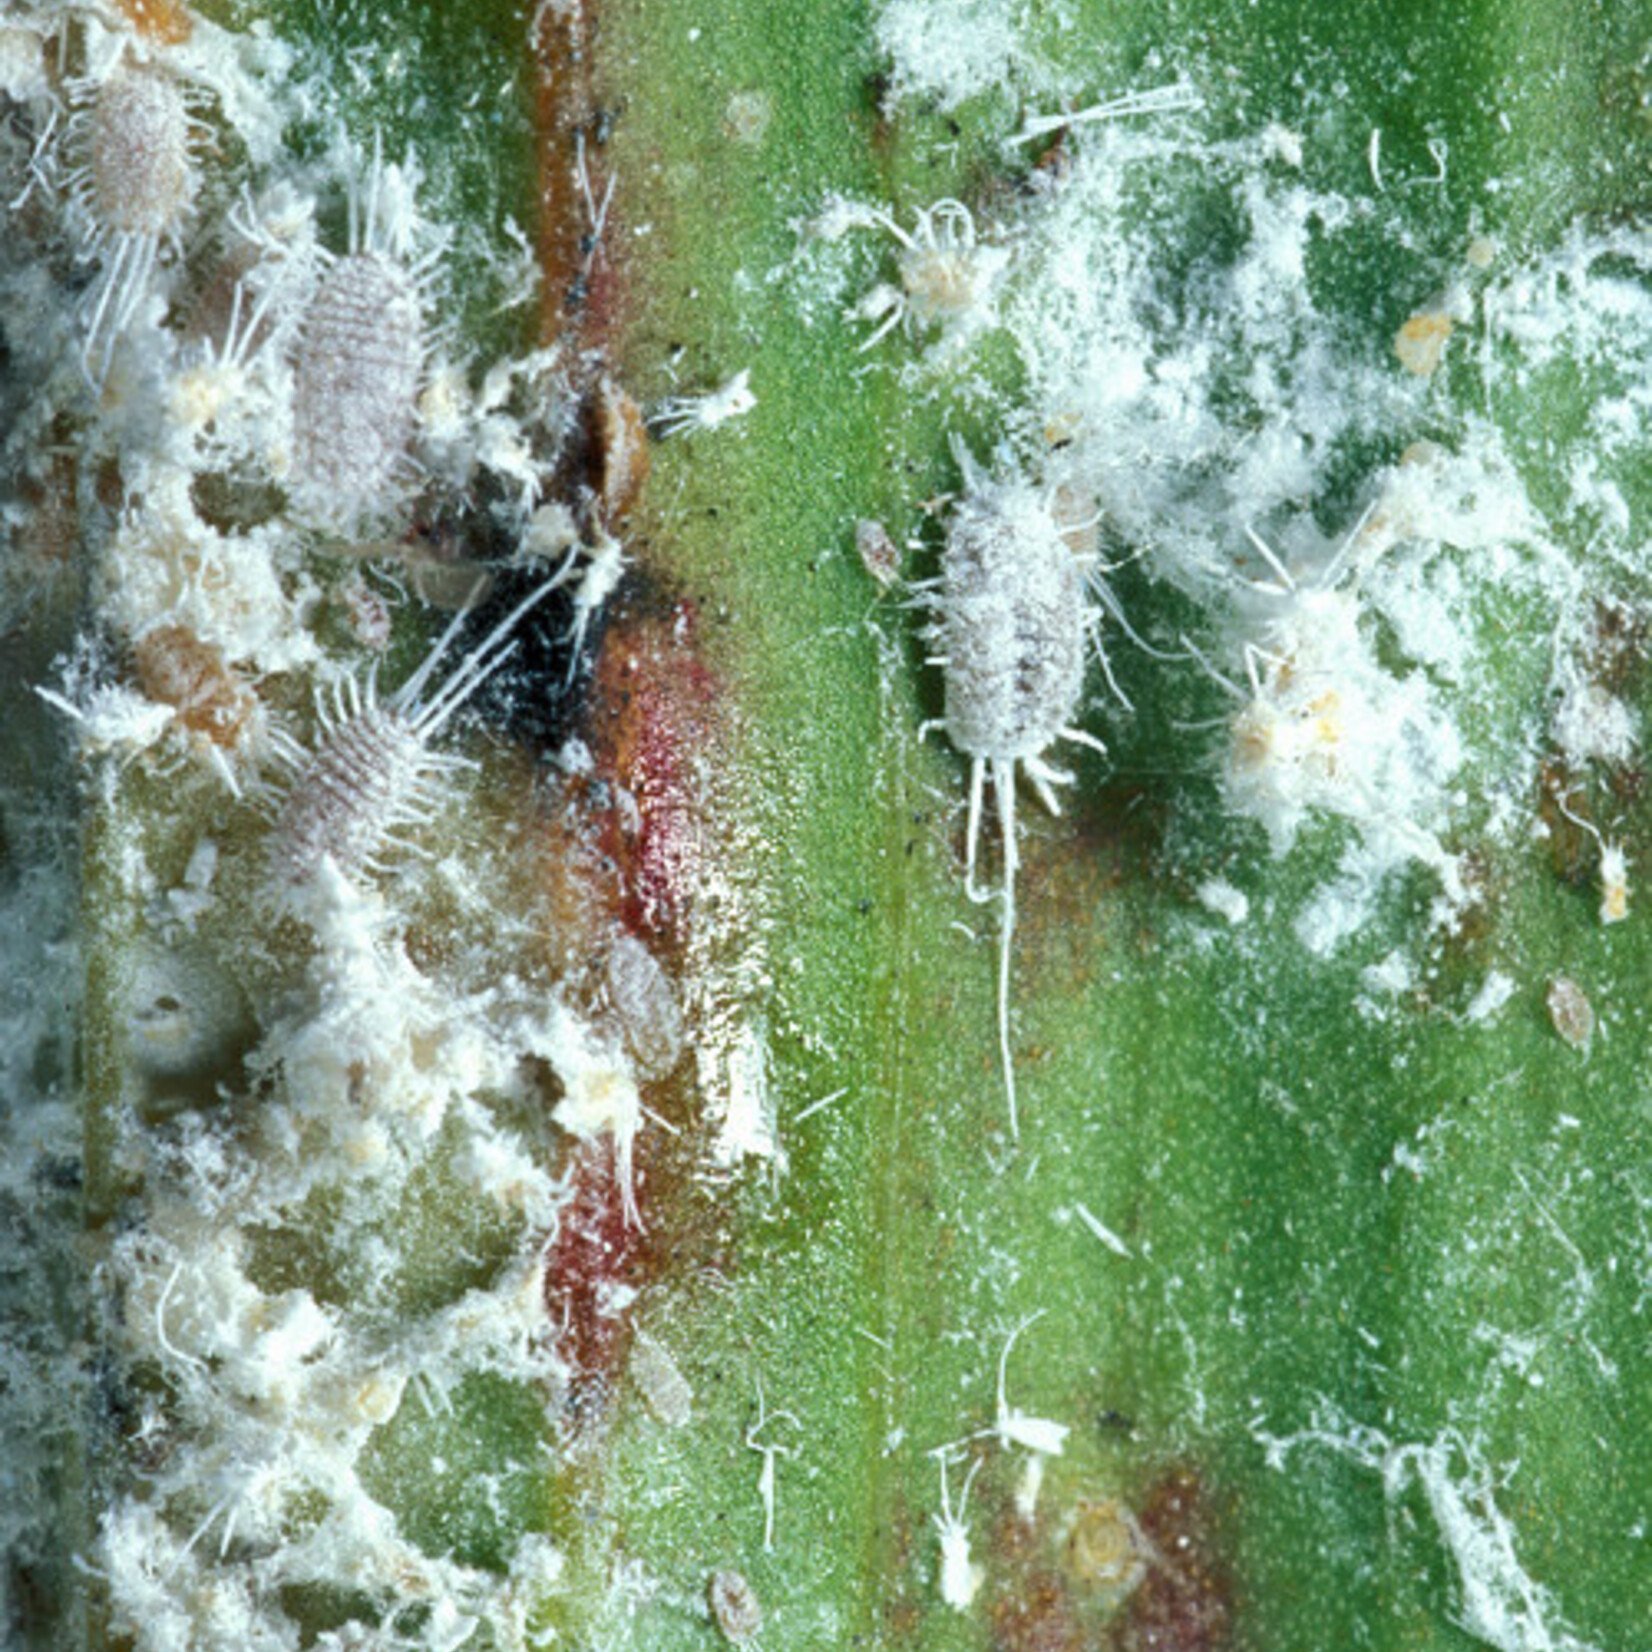 Insect, Mealy bugs